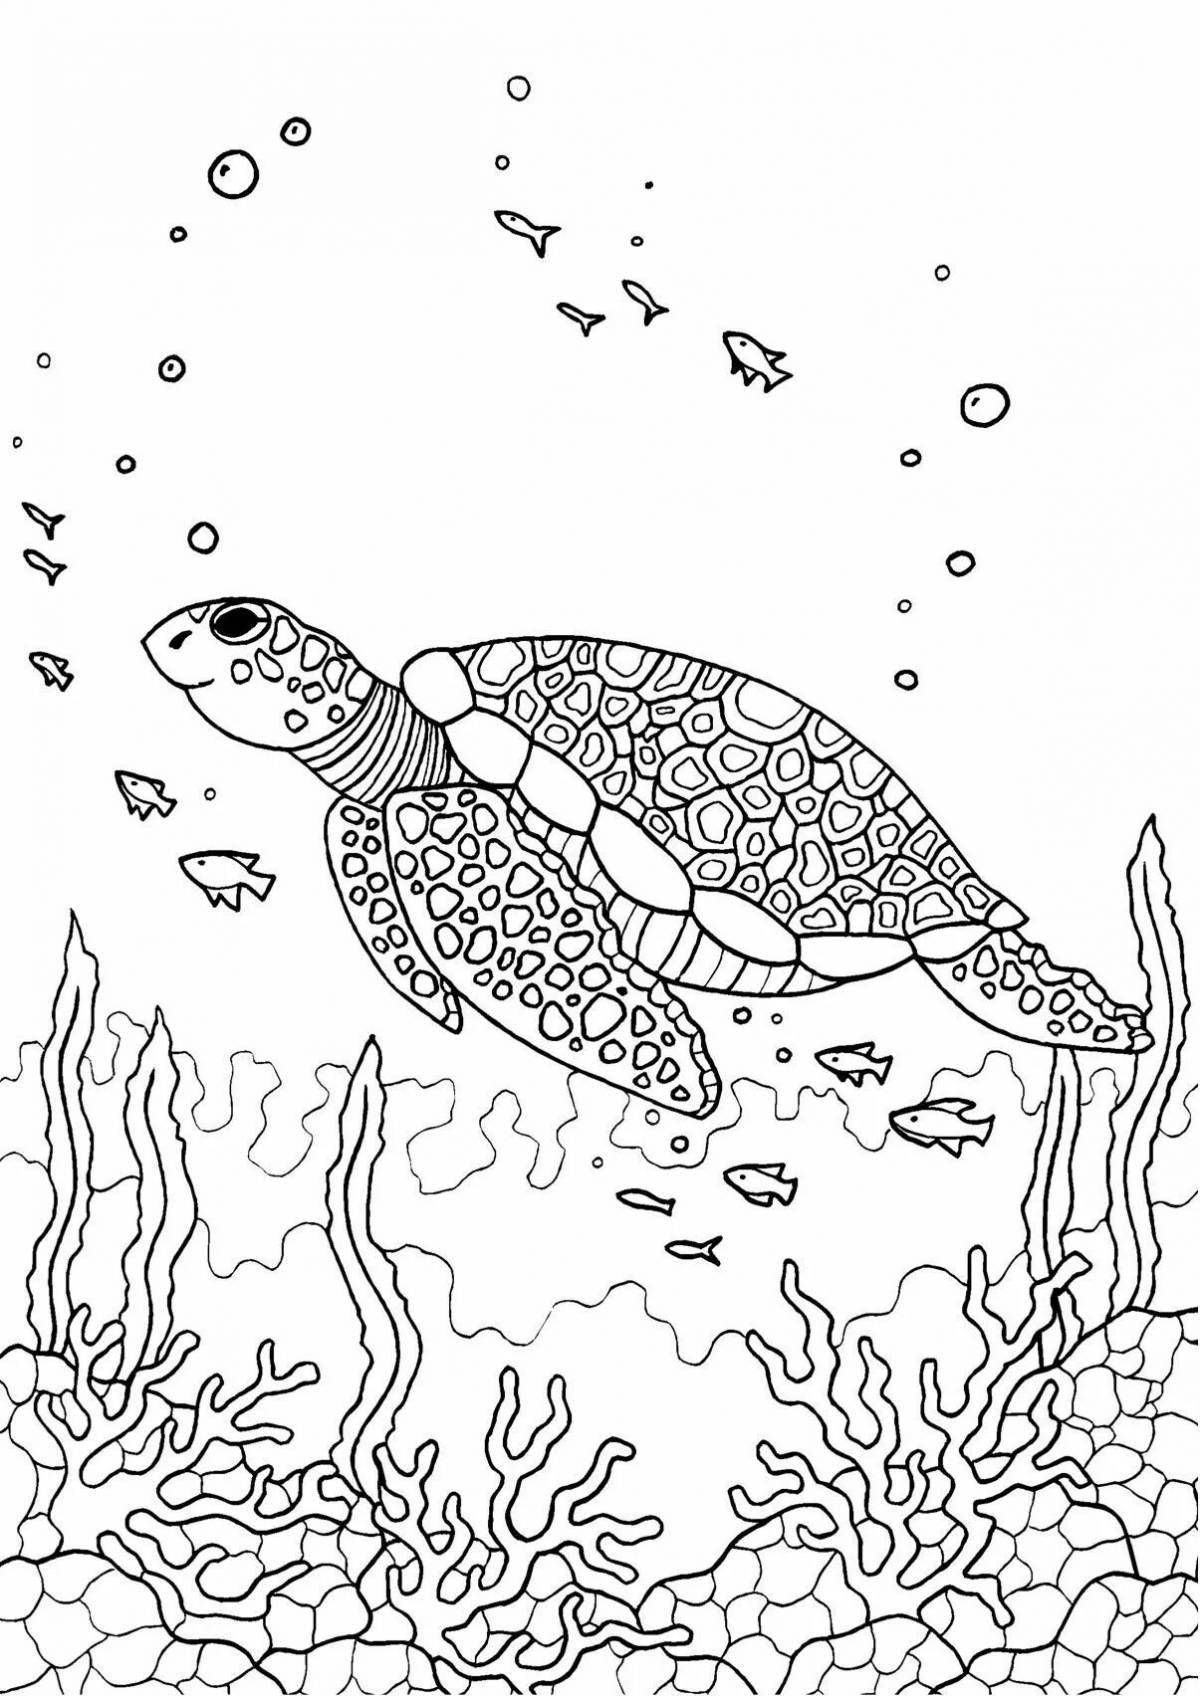 Coloring page bizarre water world